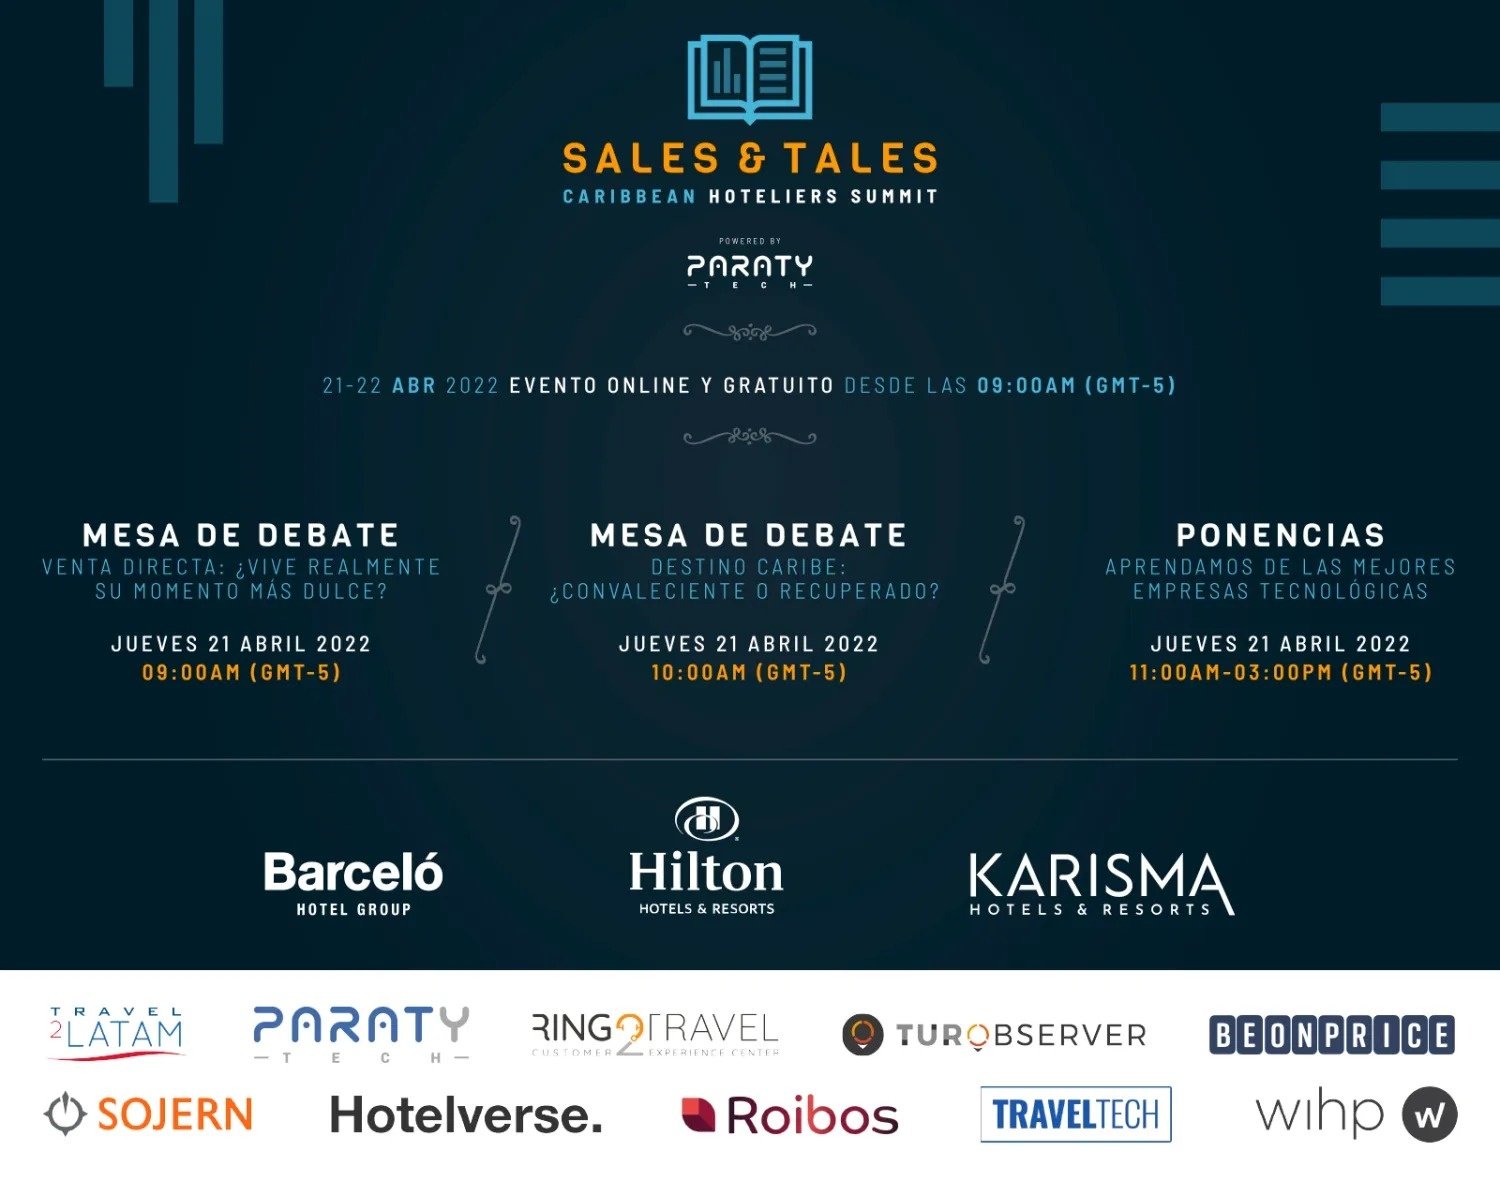 On April 21, hoteliers and technology companies meet at Sales & Tales Caribbean Hoteliers Summit